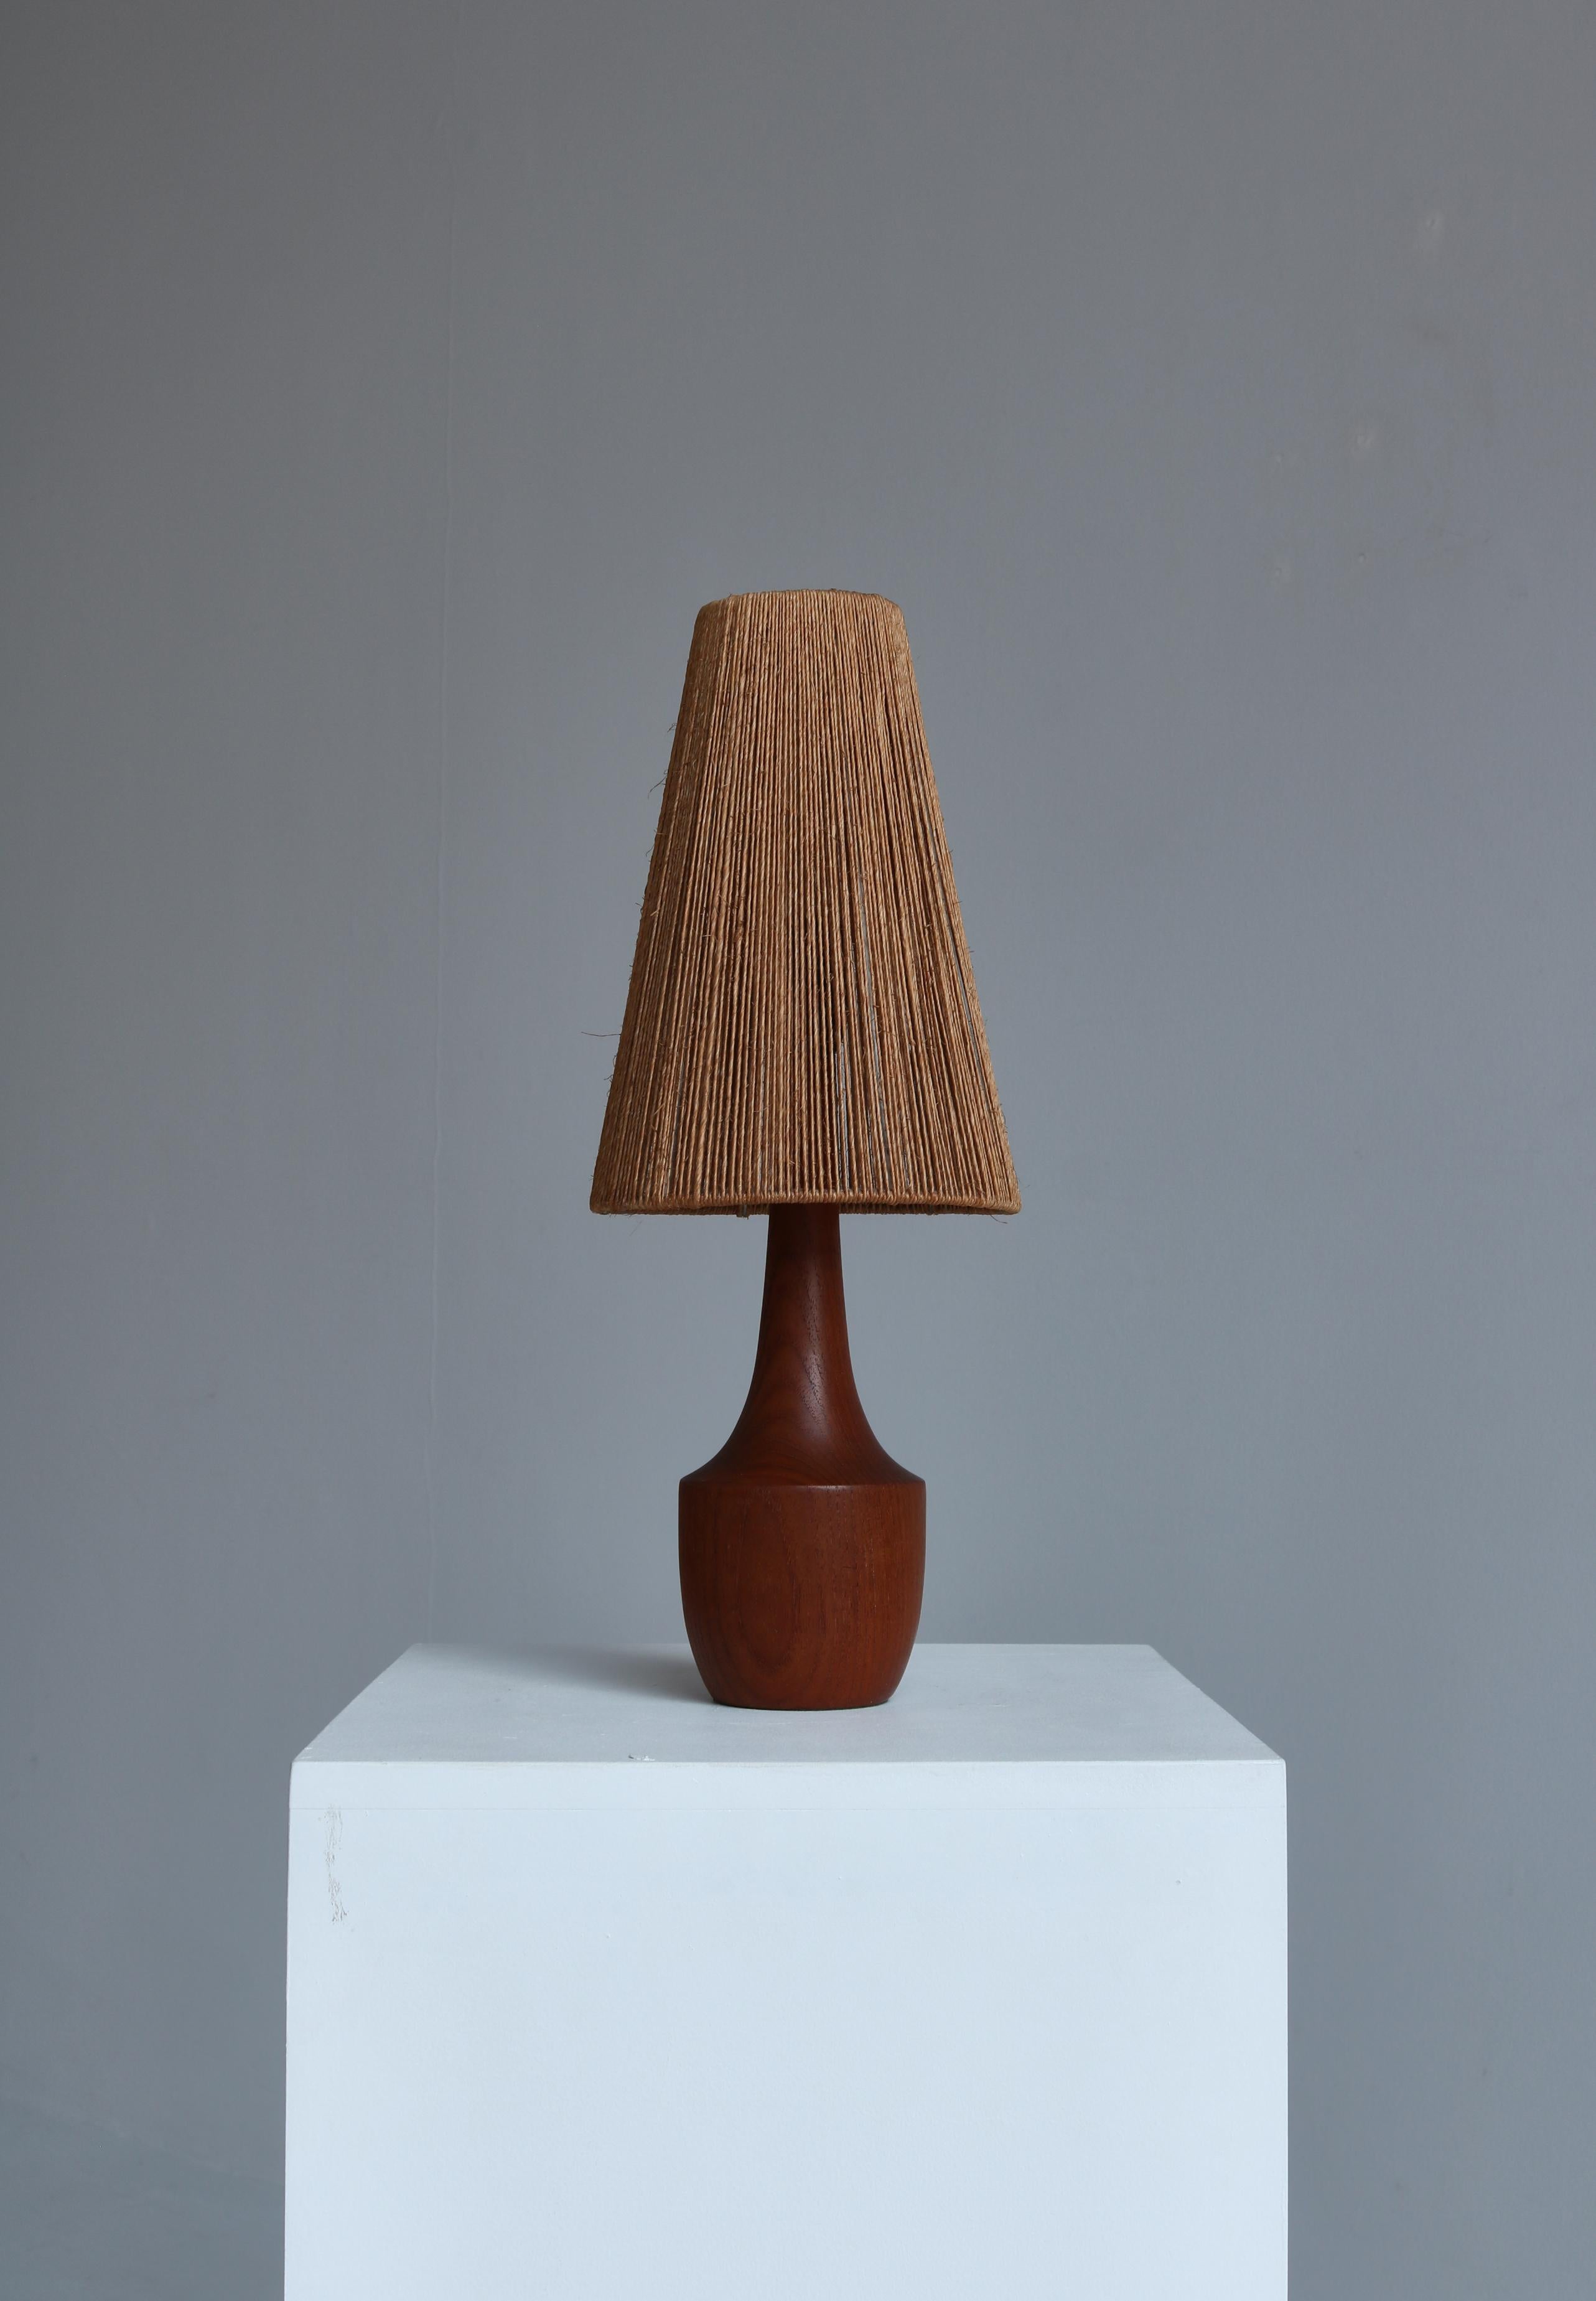 Wonderful table lamp made in Denmark in the 1950s. The base is made of solid turned Bangkok teakwood and the shade consists of sisal strings. The lamp is attributed to the Danish designer Ib Fabiansen who made a lot of similar lamps in this period.